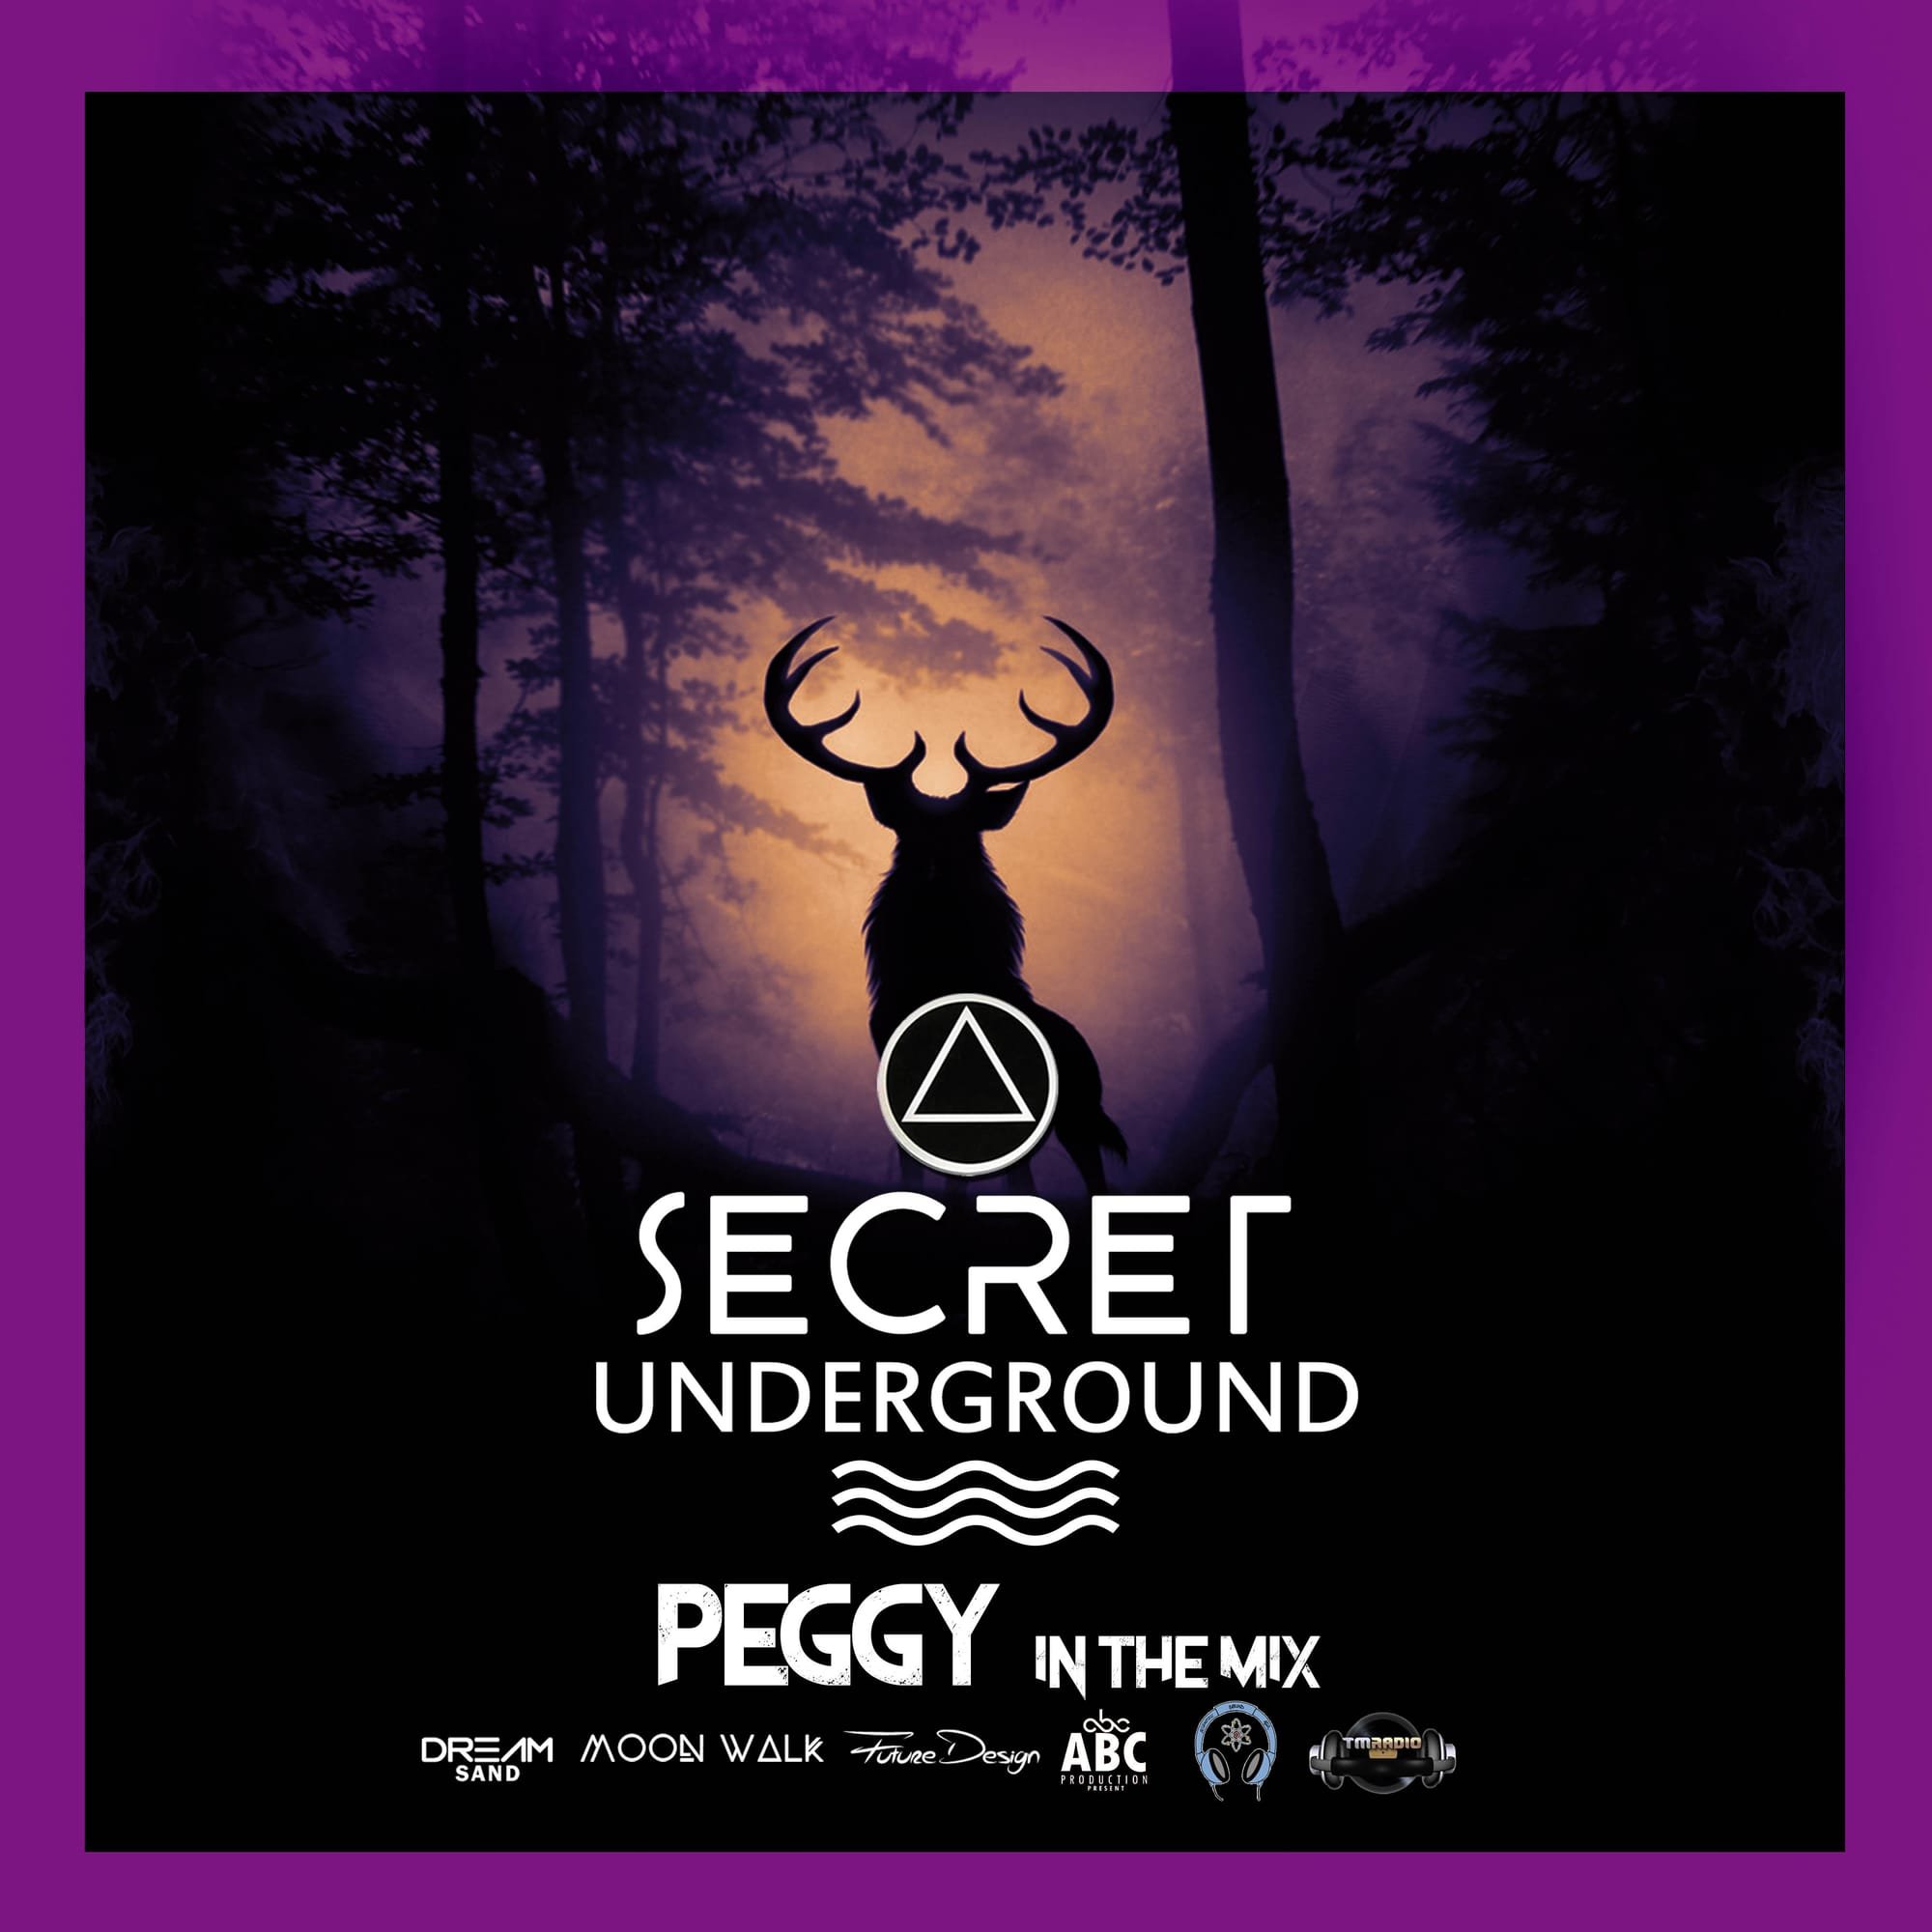 Secret Underground announce playlist and guest DJ Peggy Deluxe.